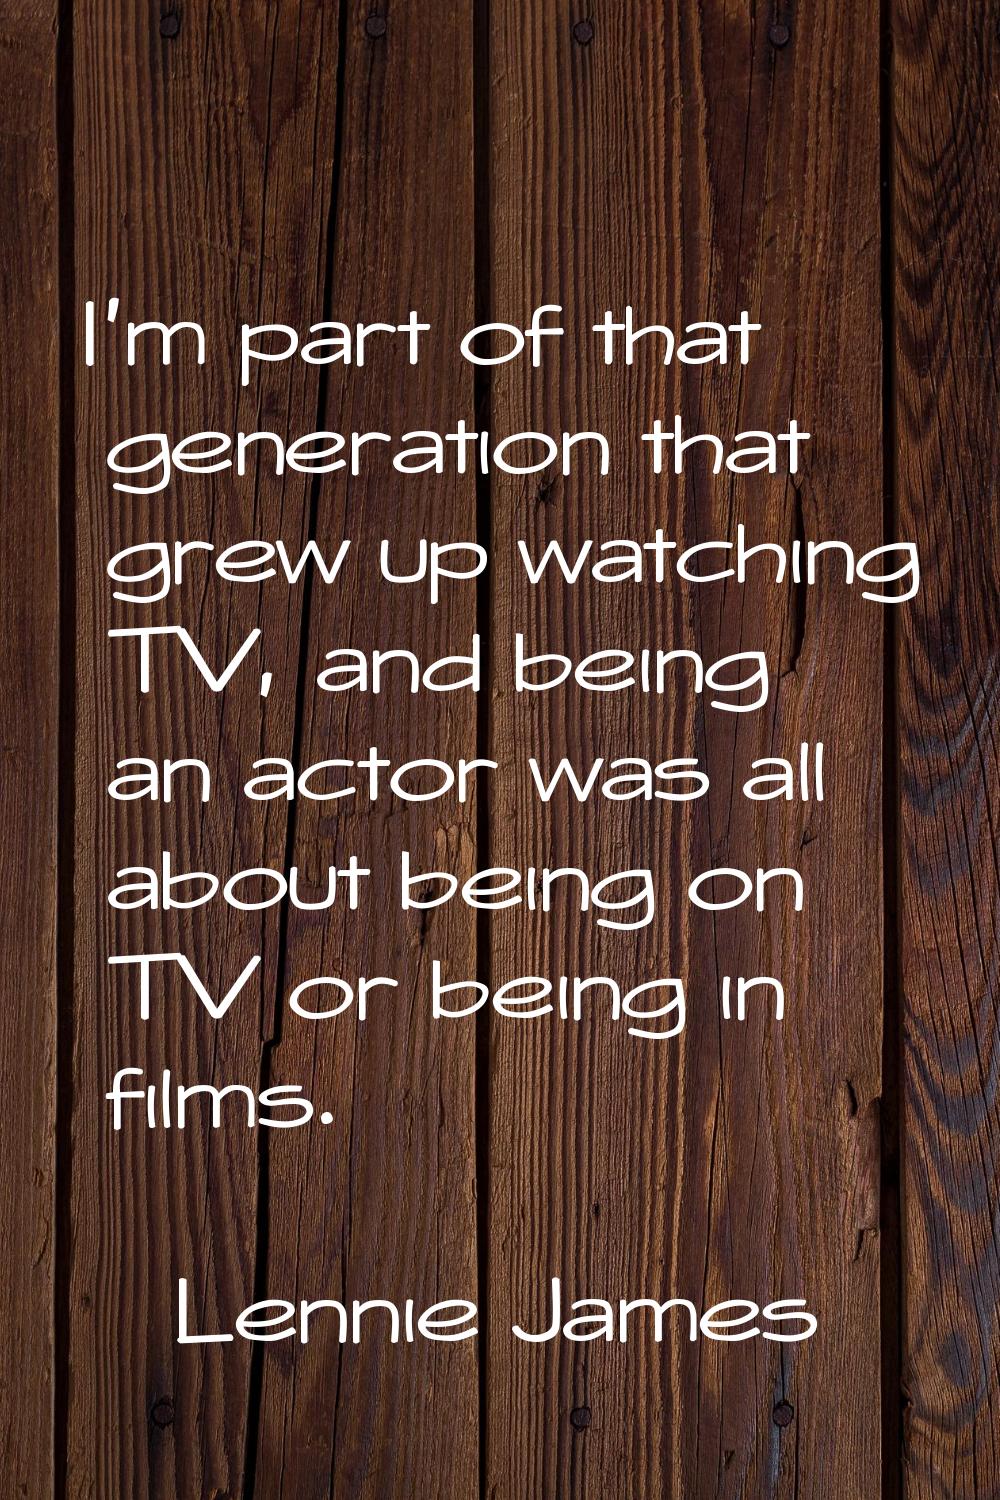 I'm part of that generation that grew up watching TV, and being an actor was all about being on TV 